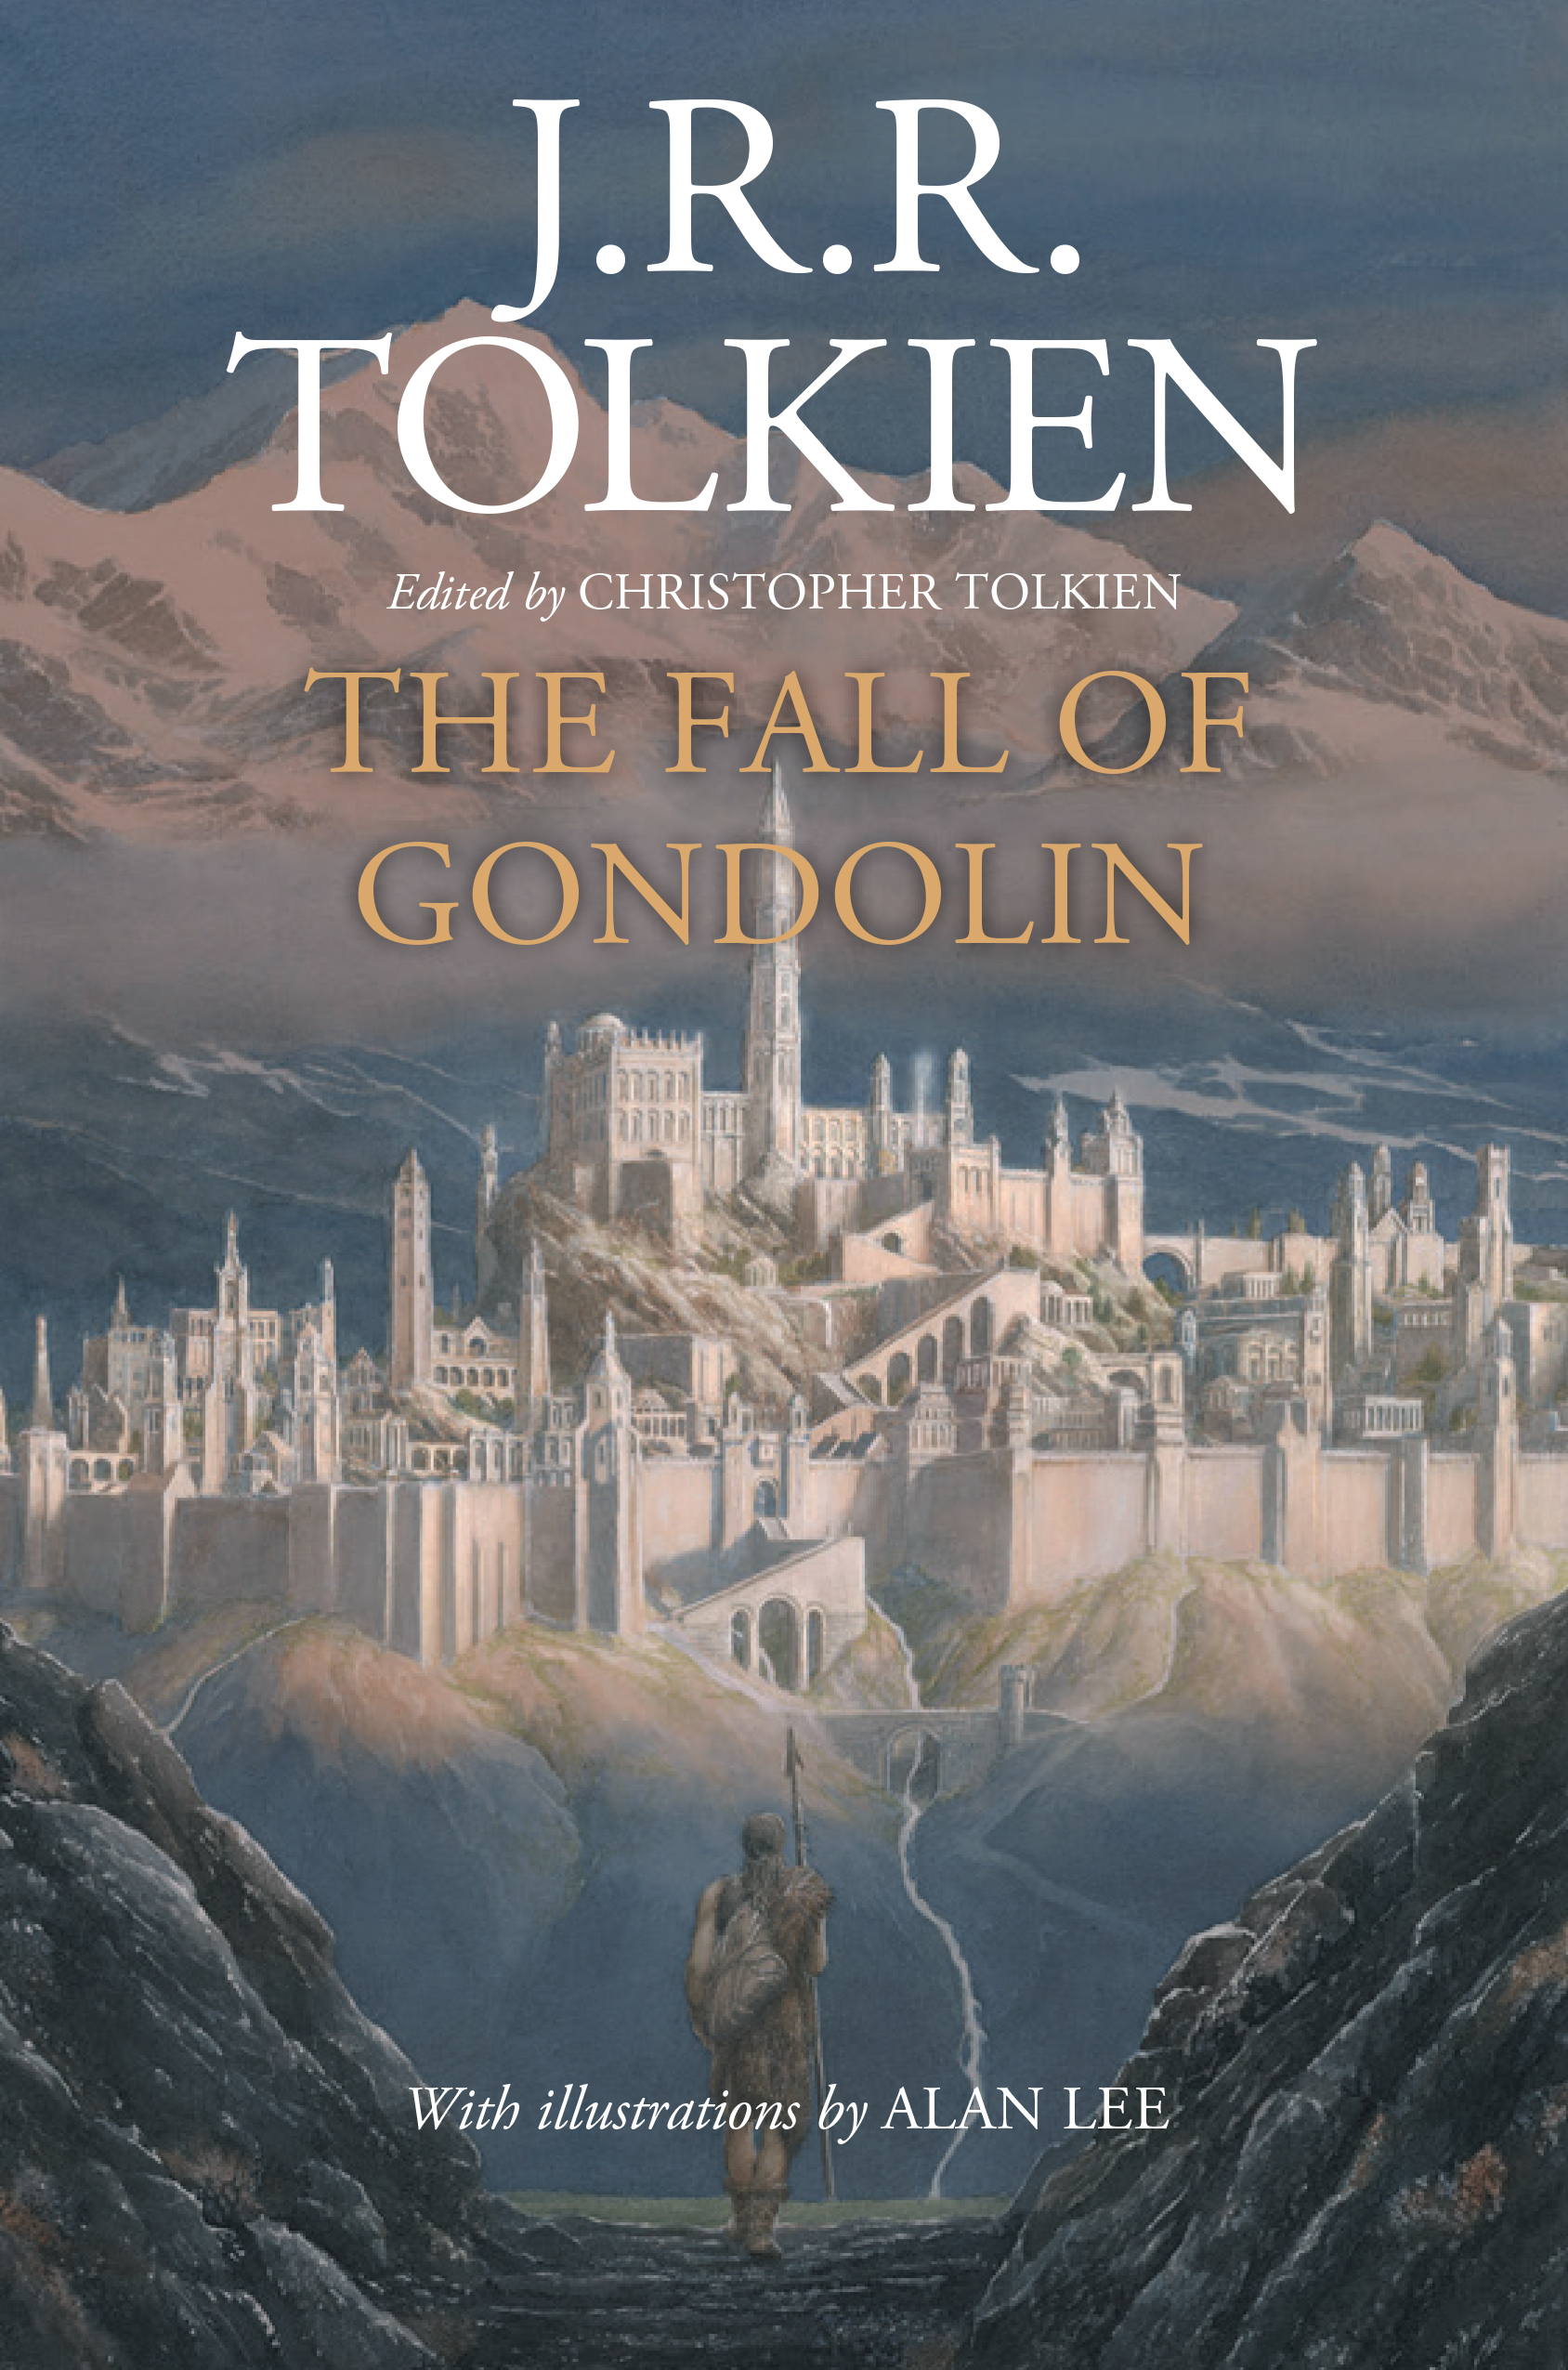 The Fall of Gondolin by J.R.R. Tolkien (Houghton Mifflin Harcourt)